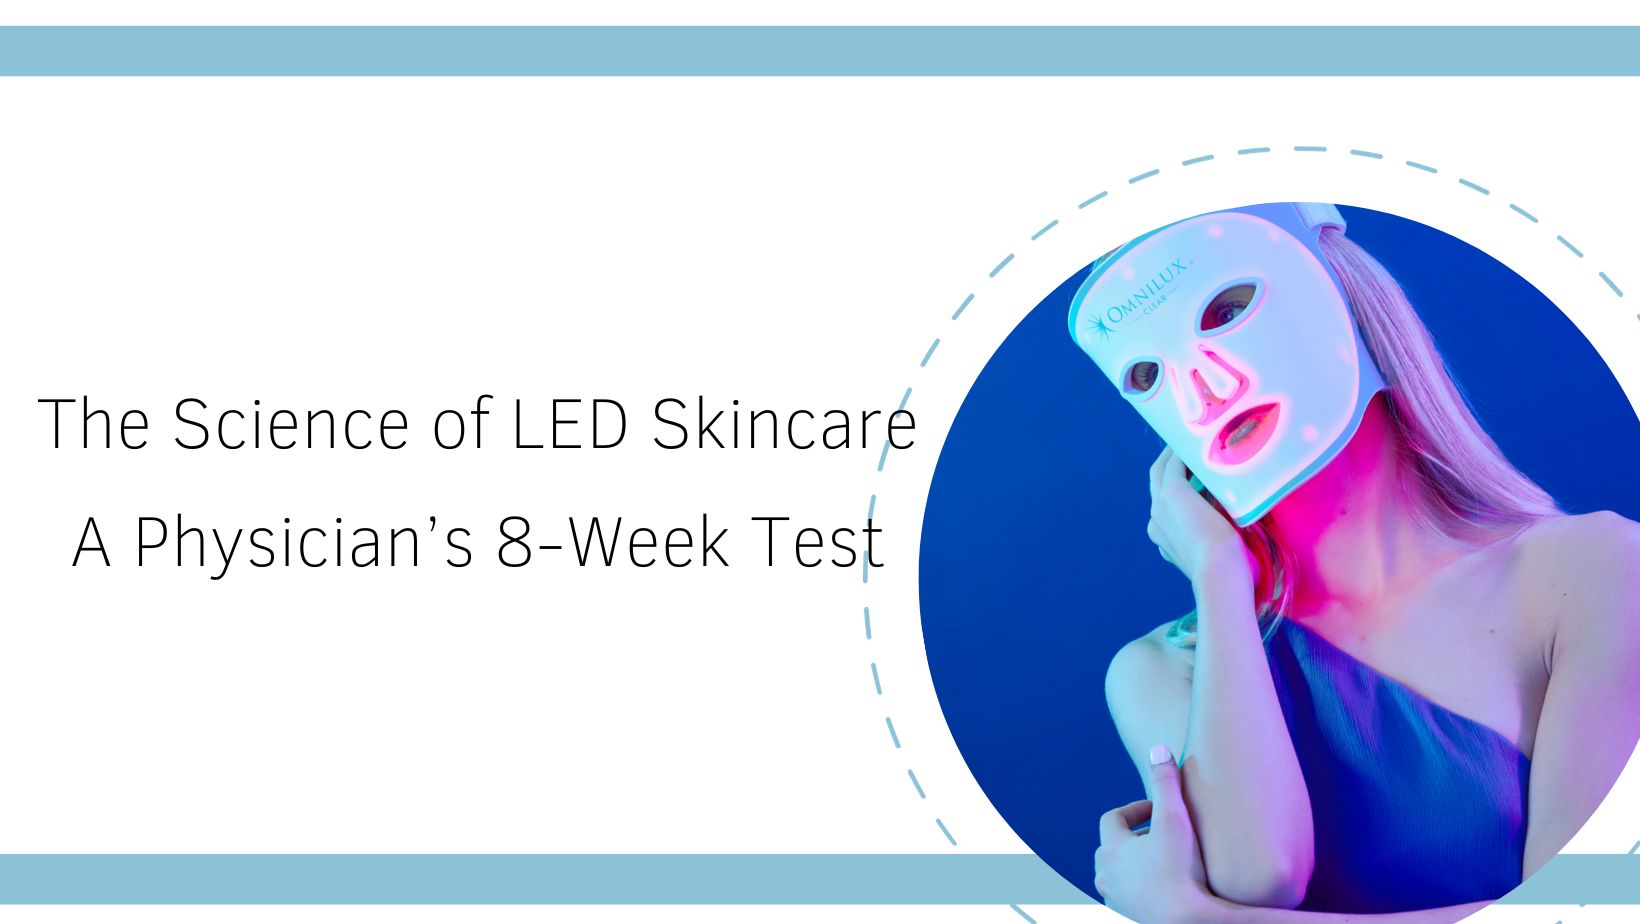 The Science of LED Skincare A Physician’s 8-Week Test